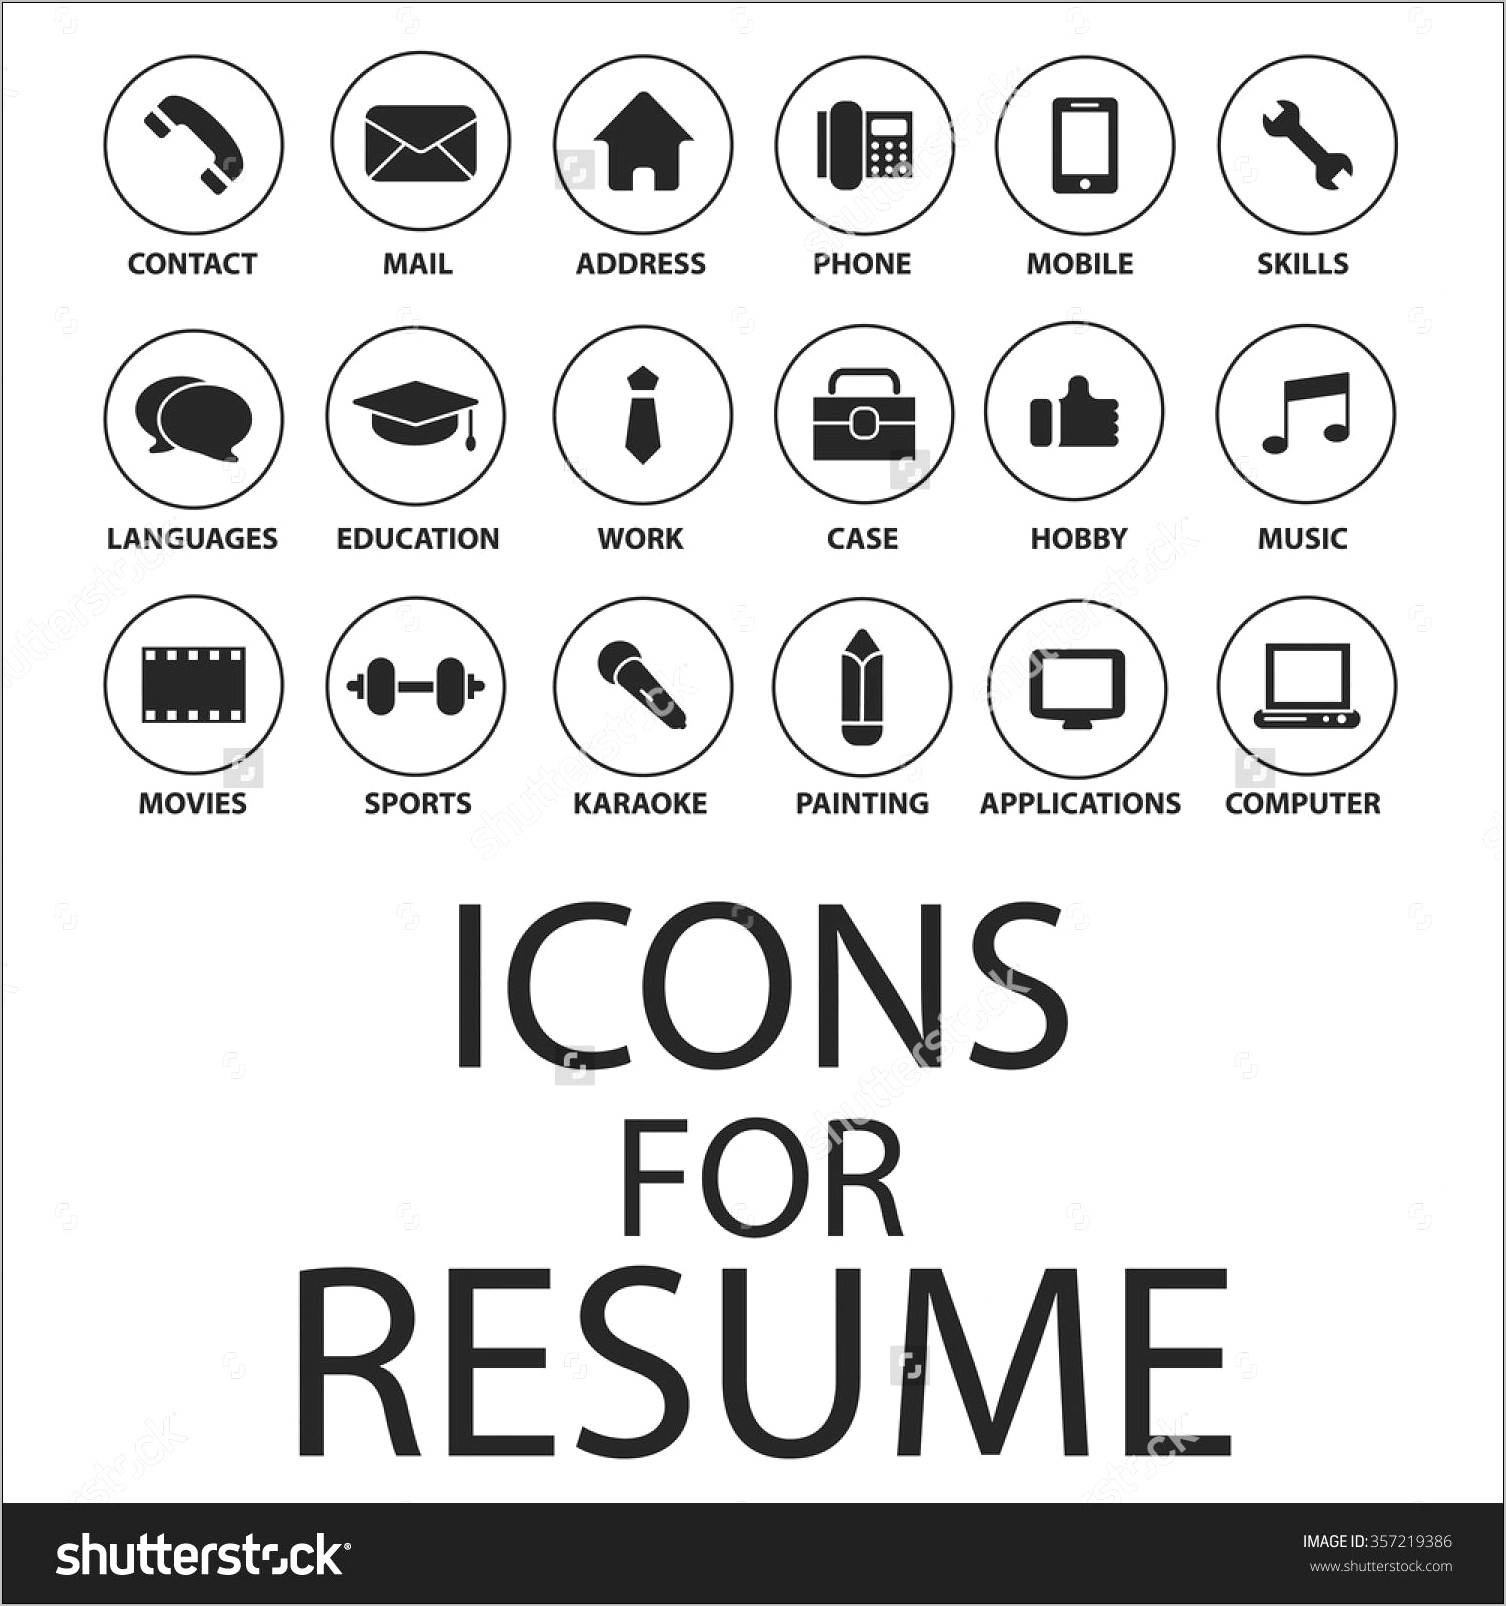 Free Interest Icons For Resume